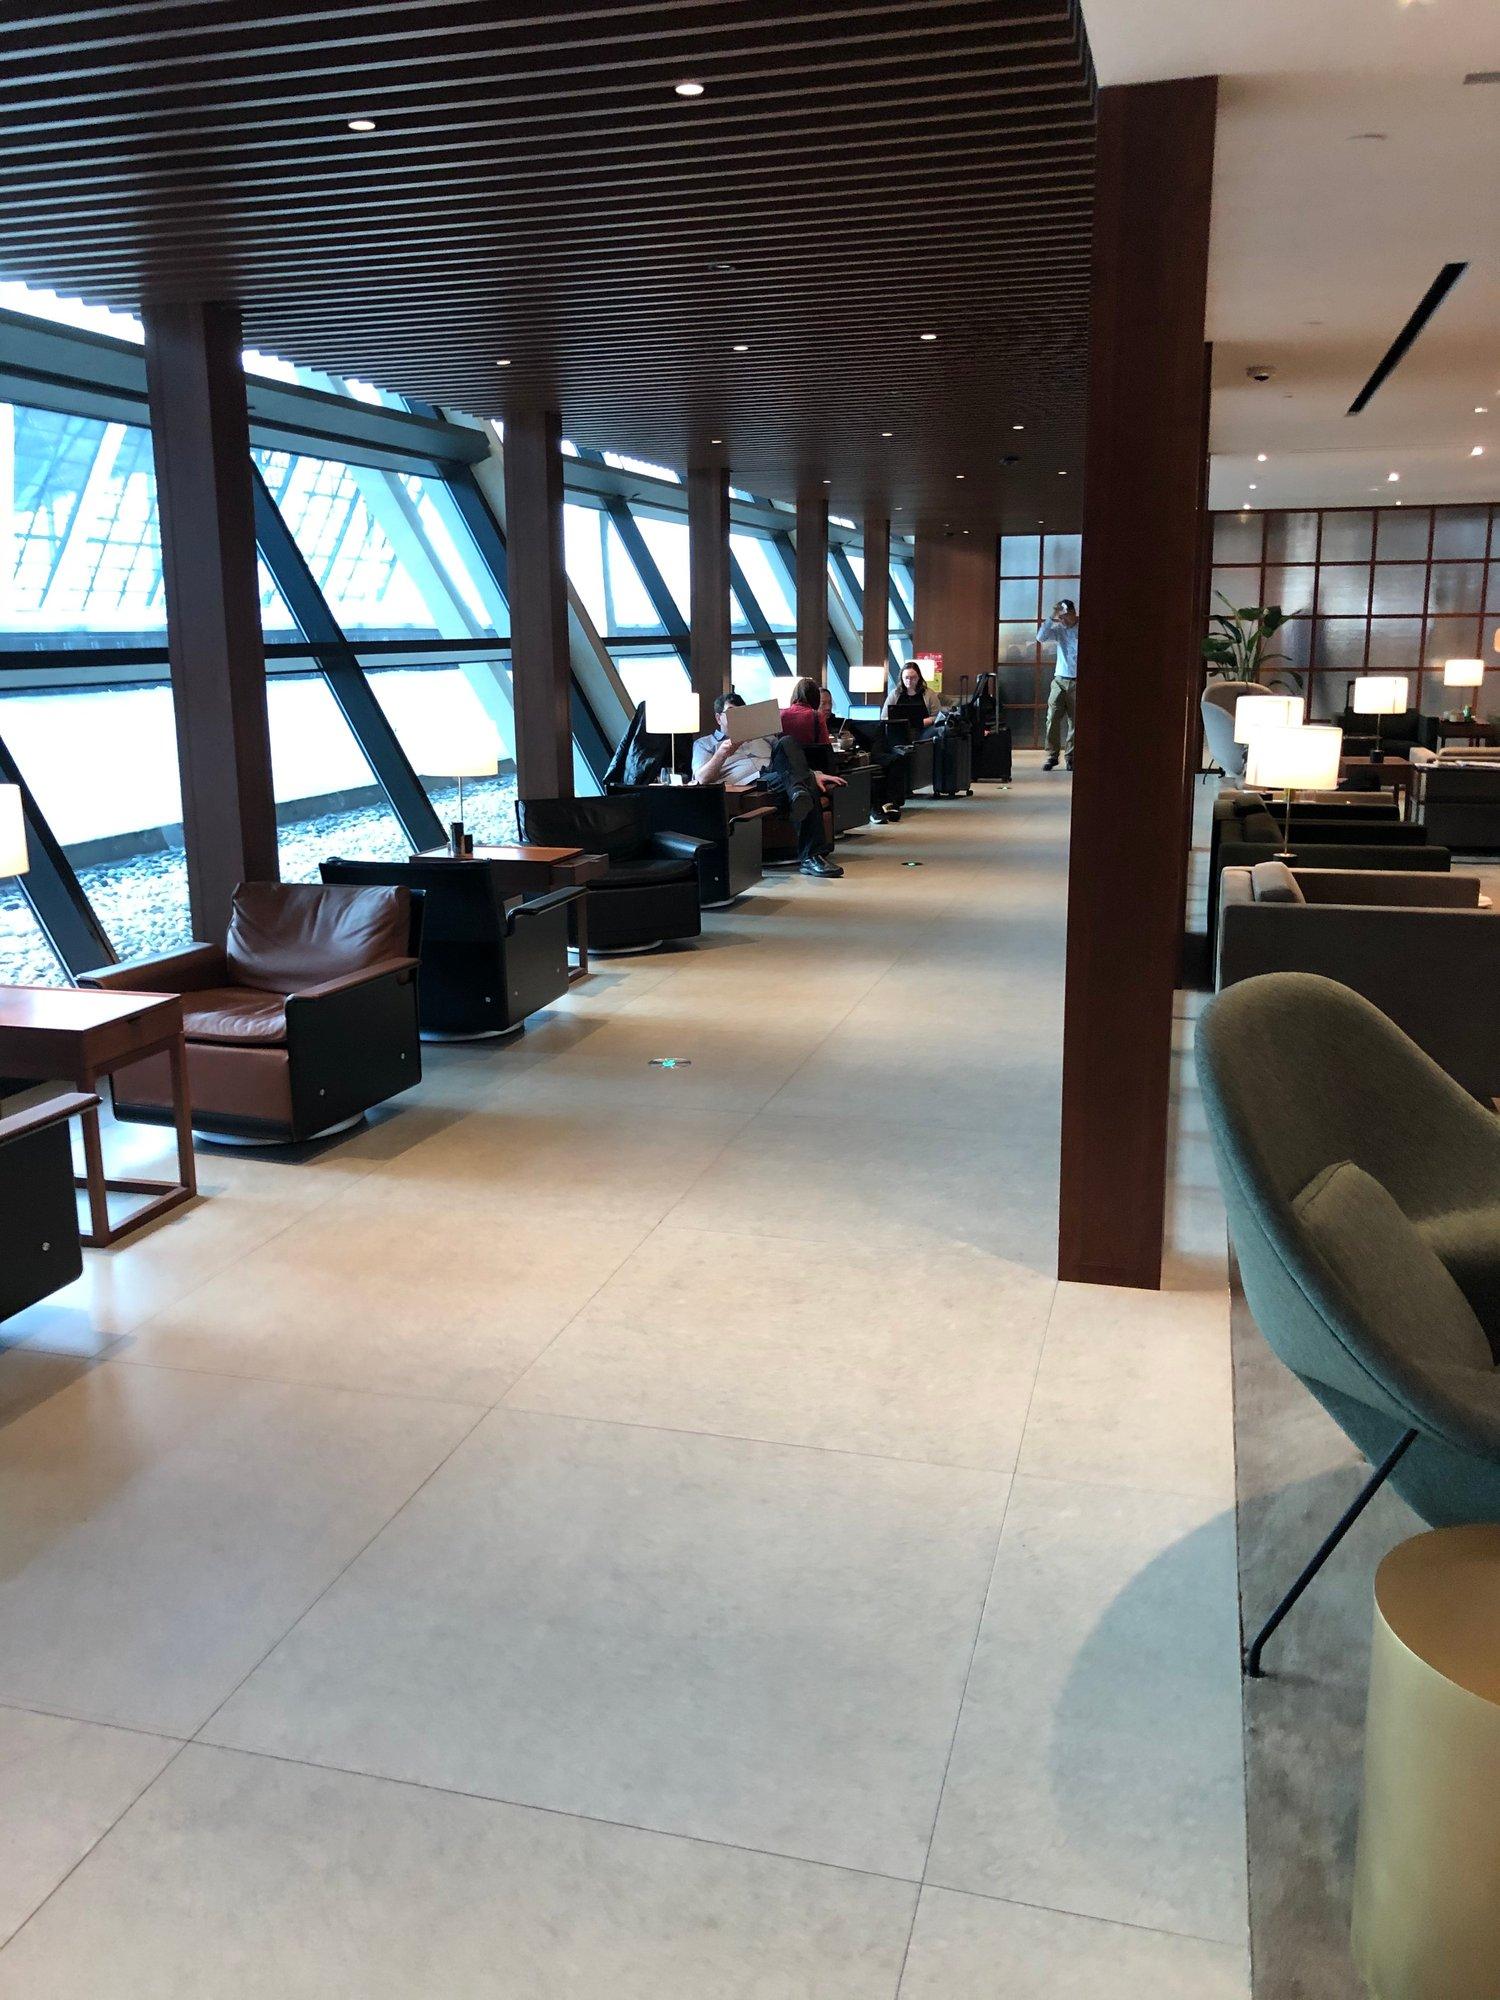 No. 68 Cathay Pacific Business Class Lounge image 4 of 7